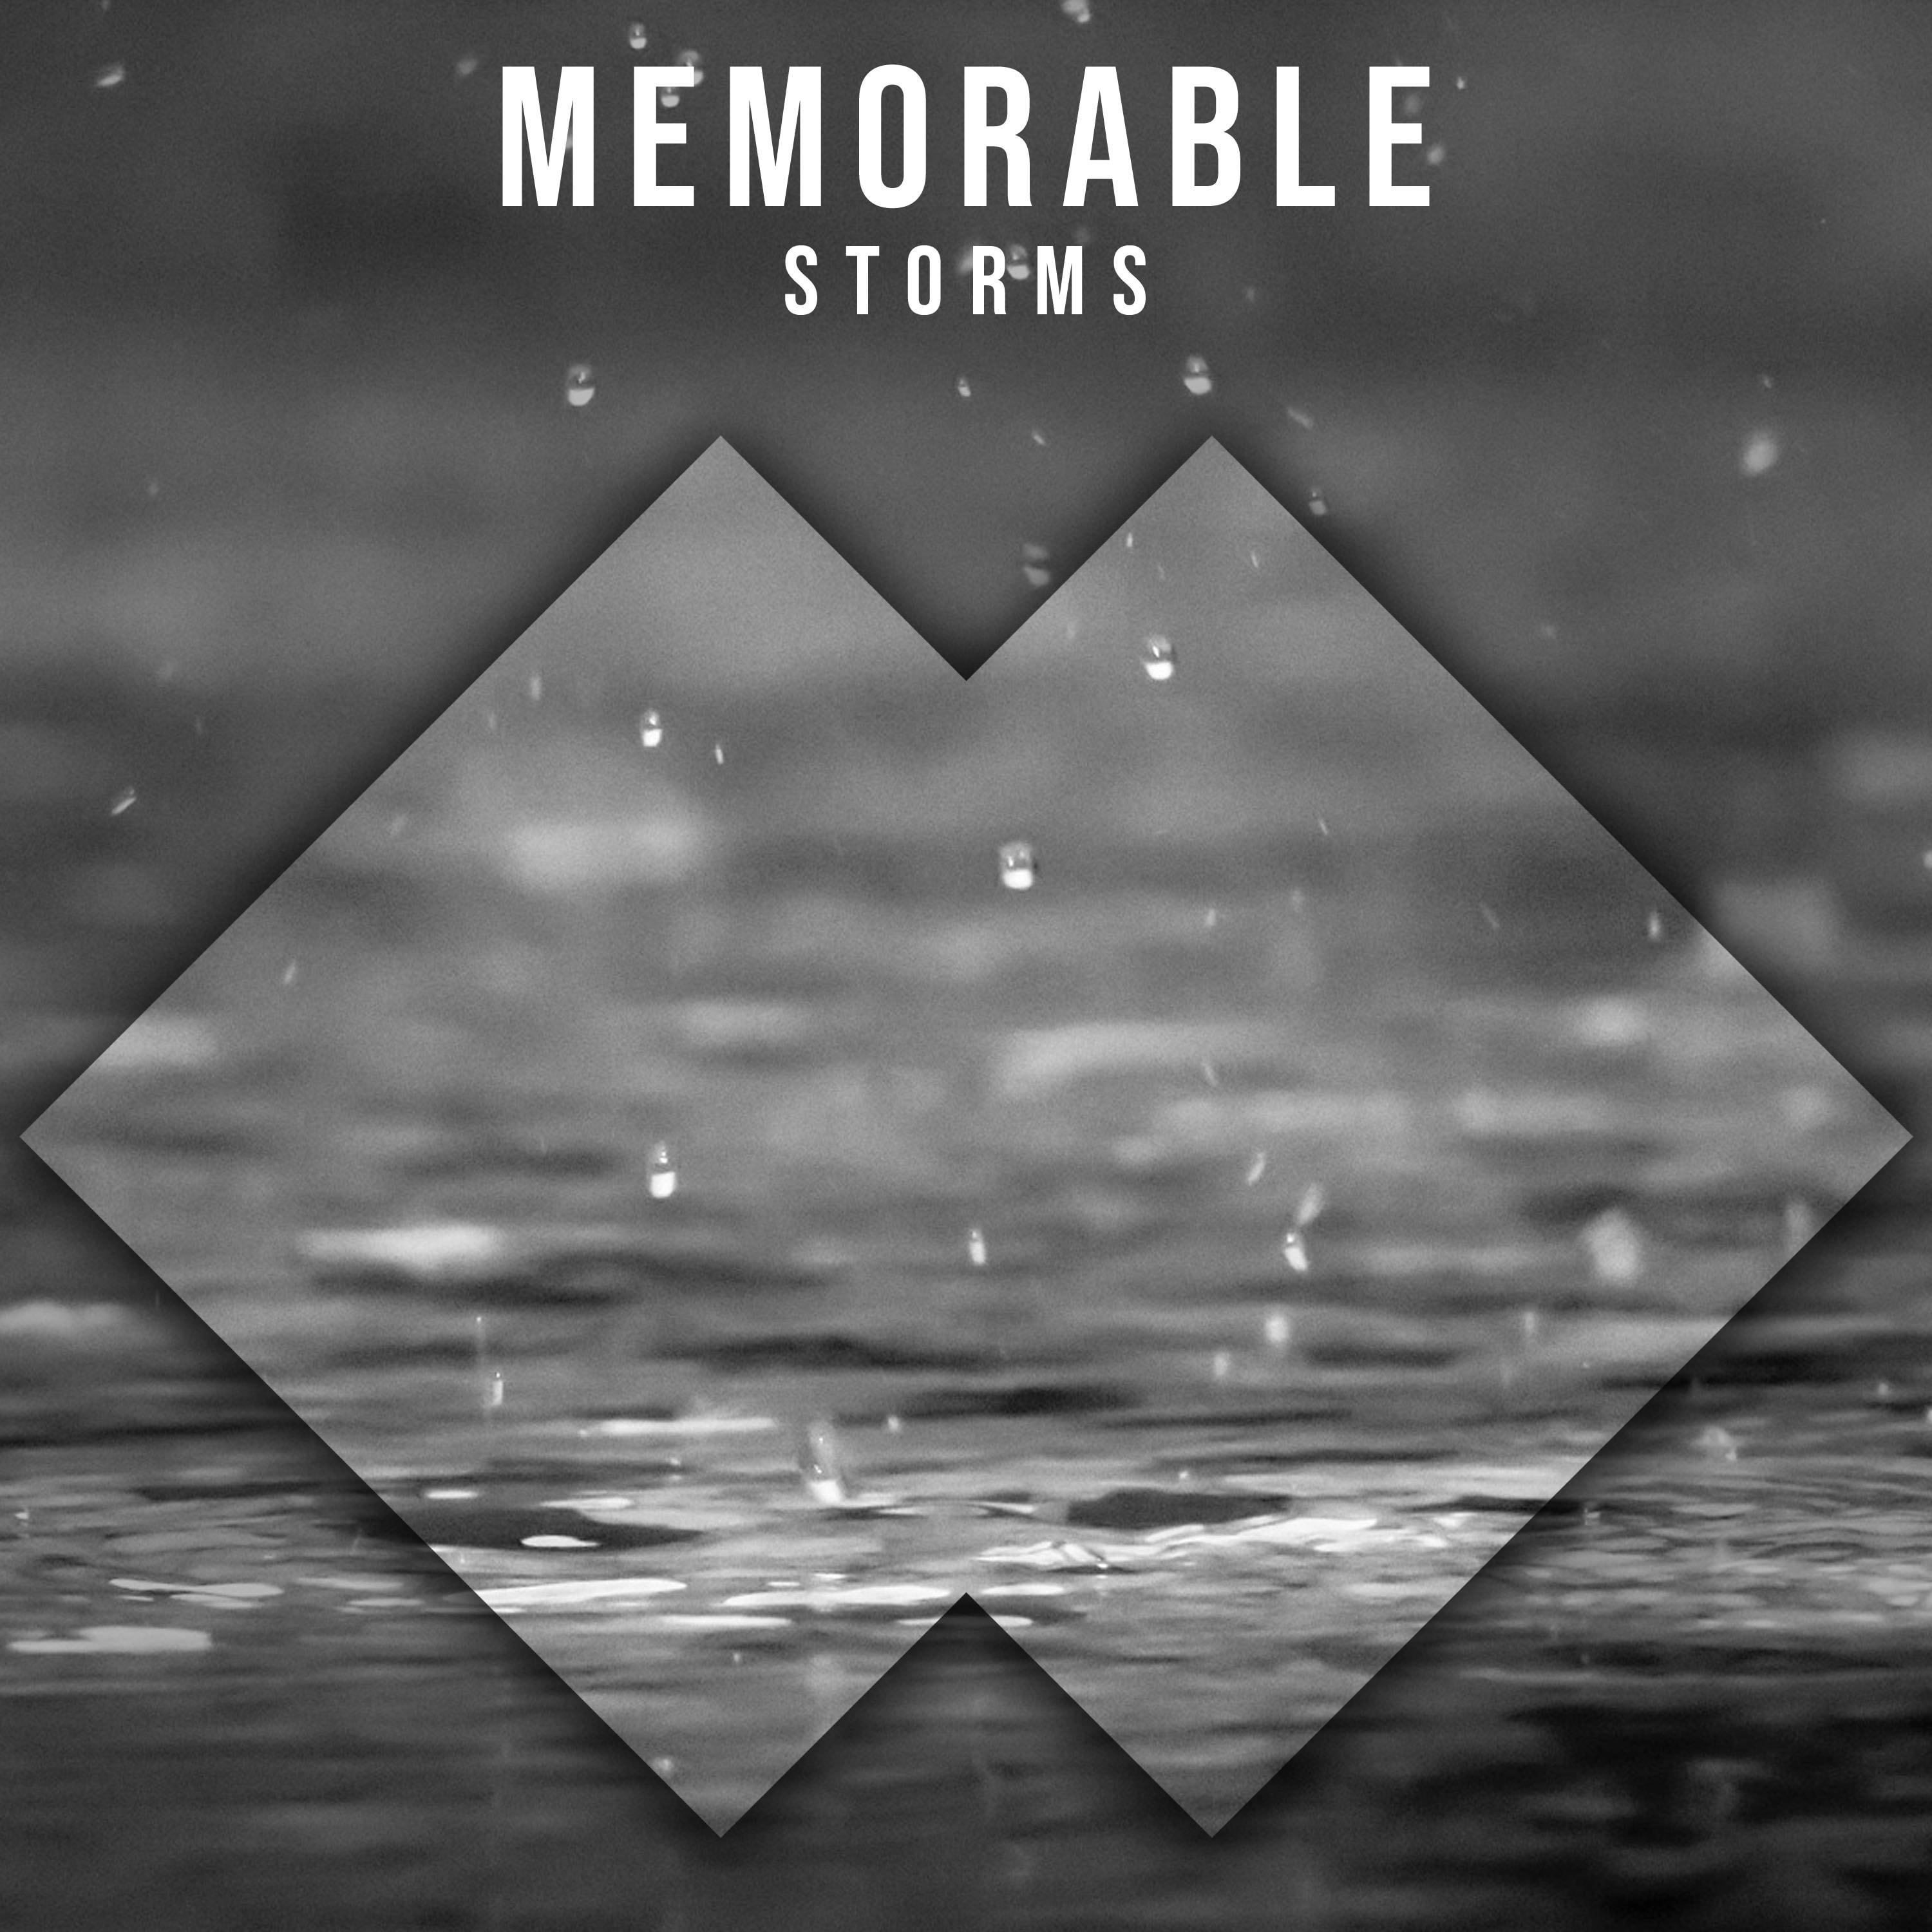 #16 Memorable Storms from Nature